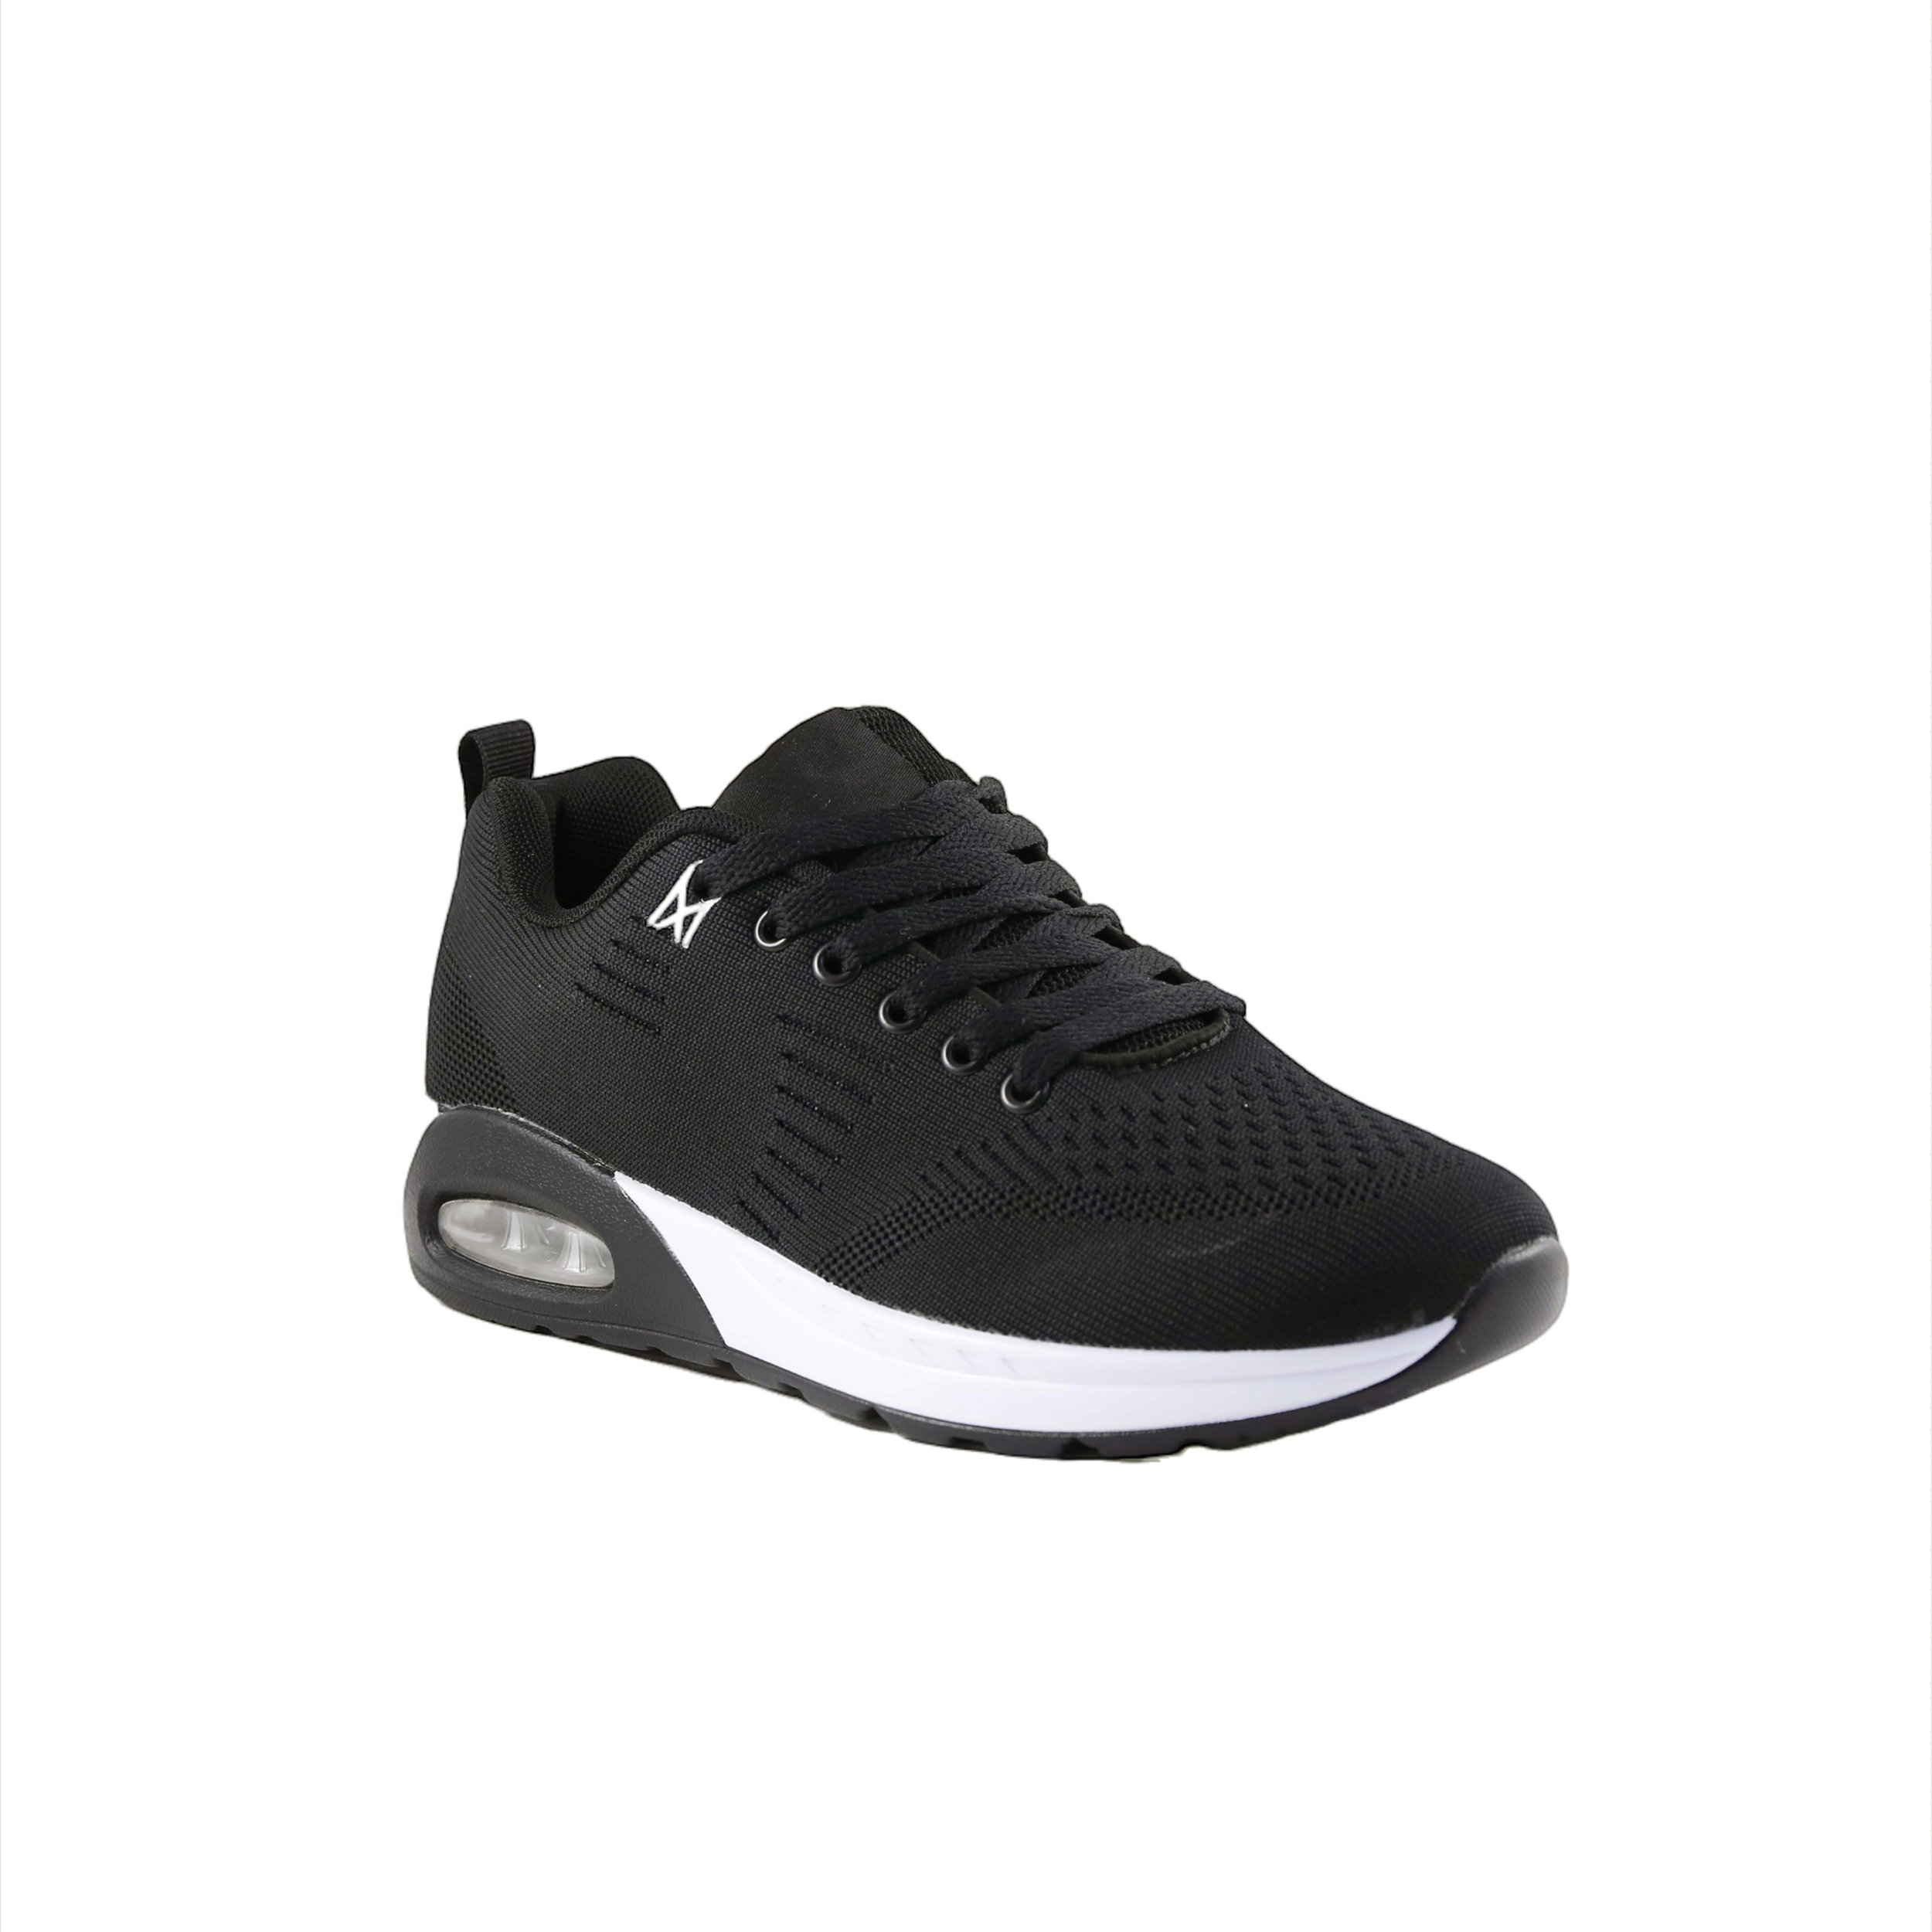 Woman Shoes Casual-Sneakers Black casual sneakers